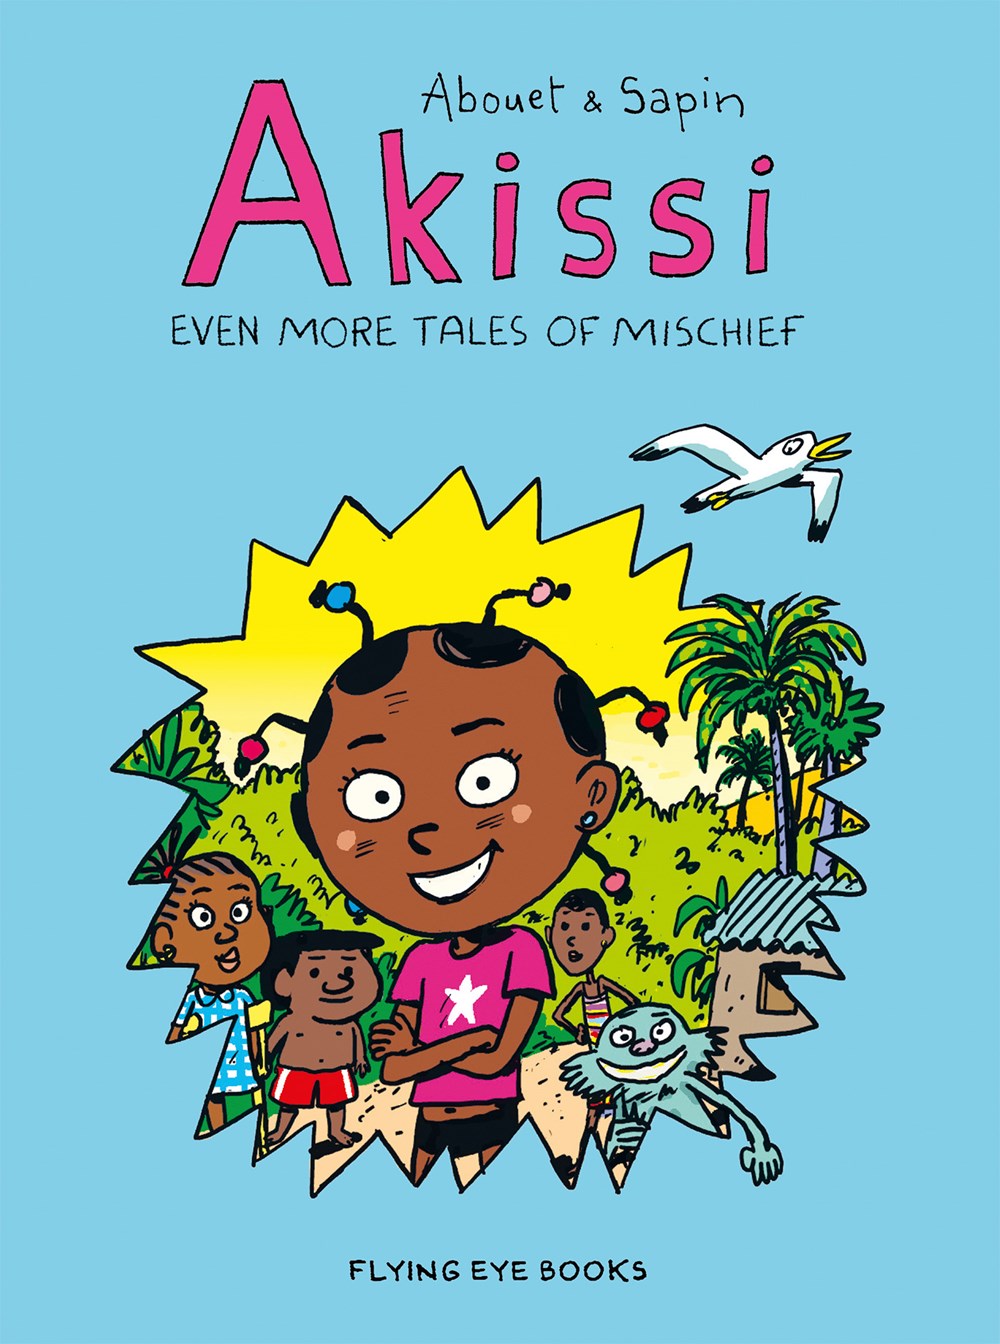 Akissi: Even More Tales of Mischief by Marguerite Abouet and Mathieu Sapin